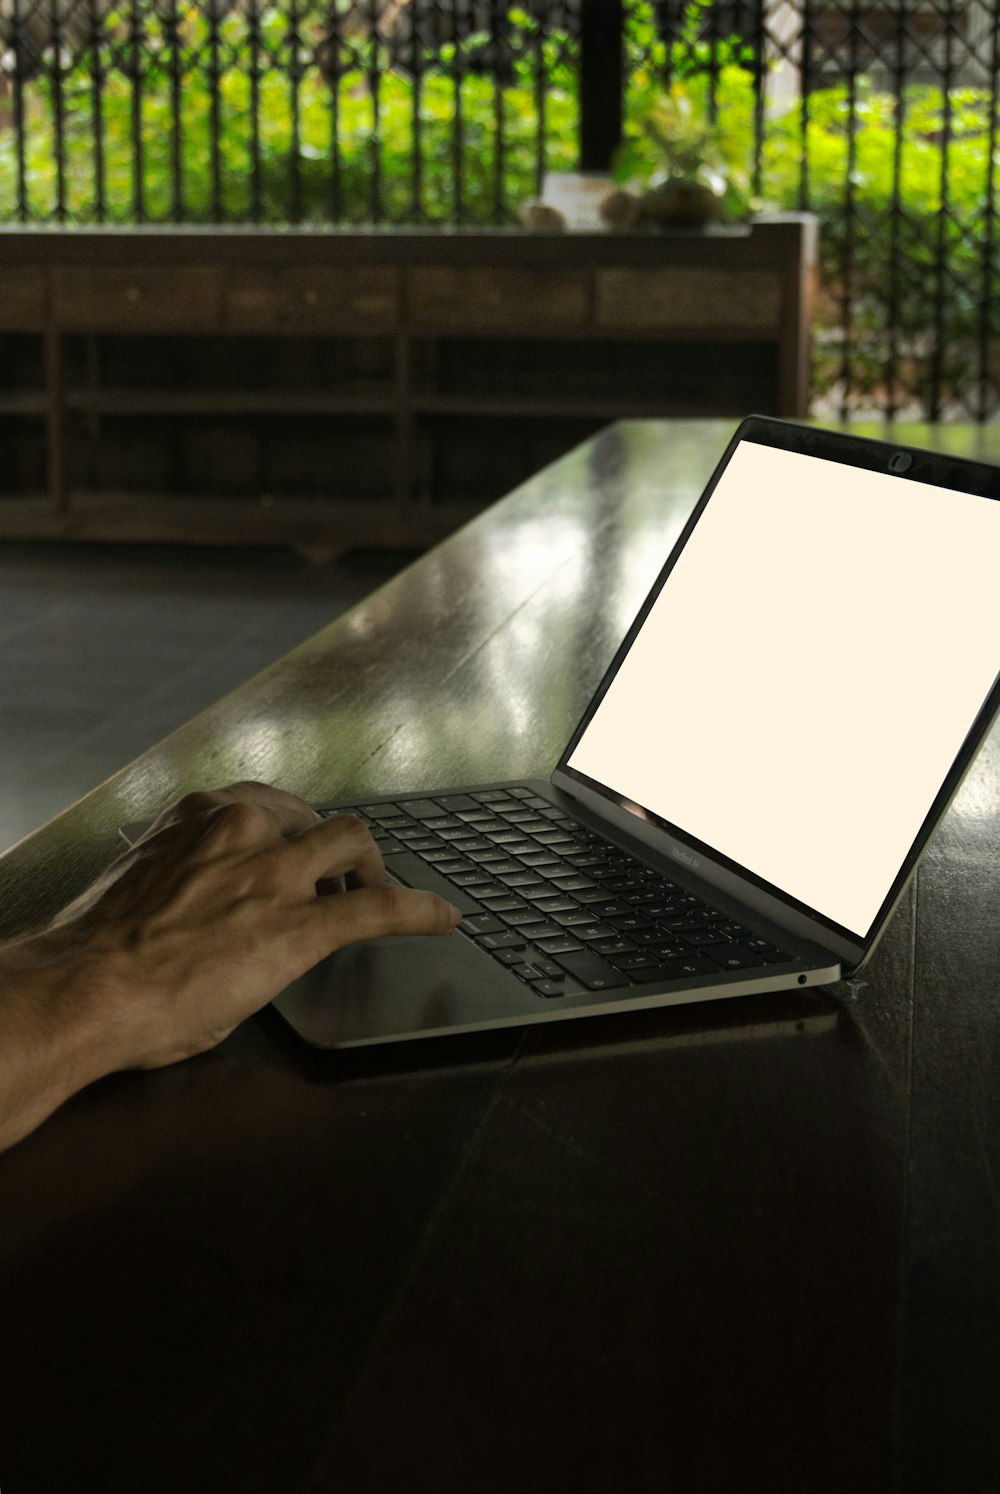 a person using a laptop computer on a table